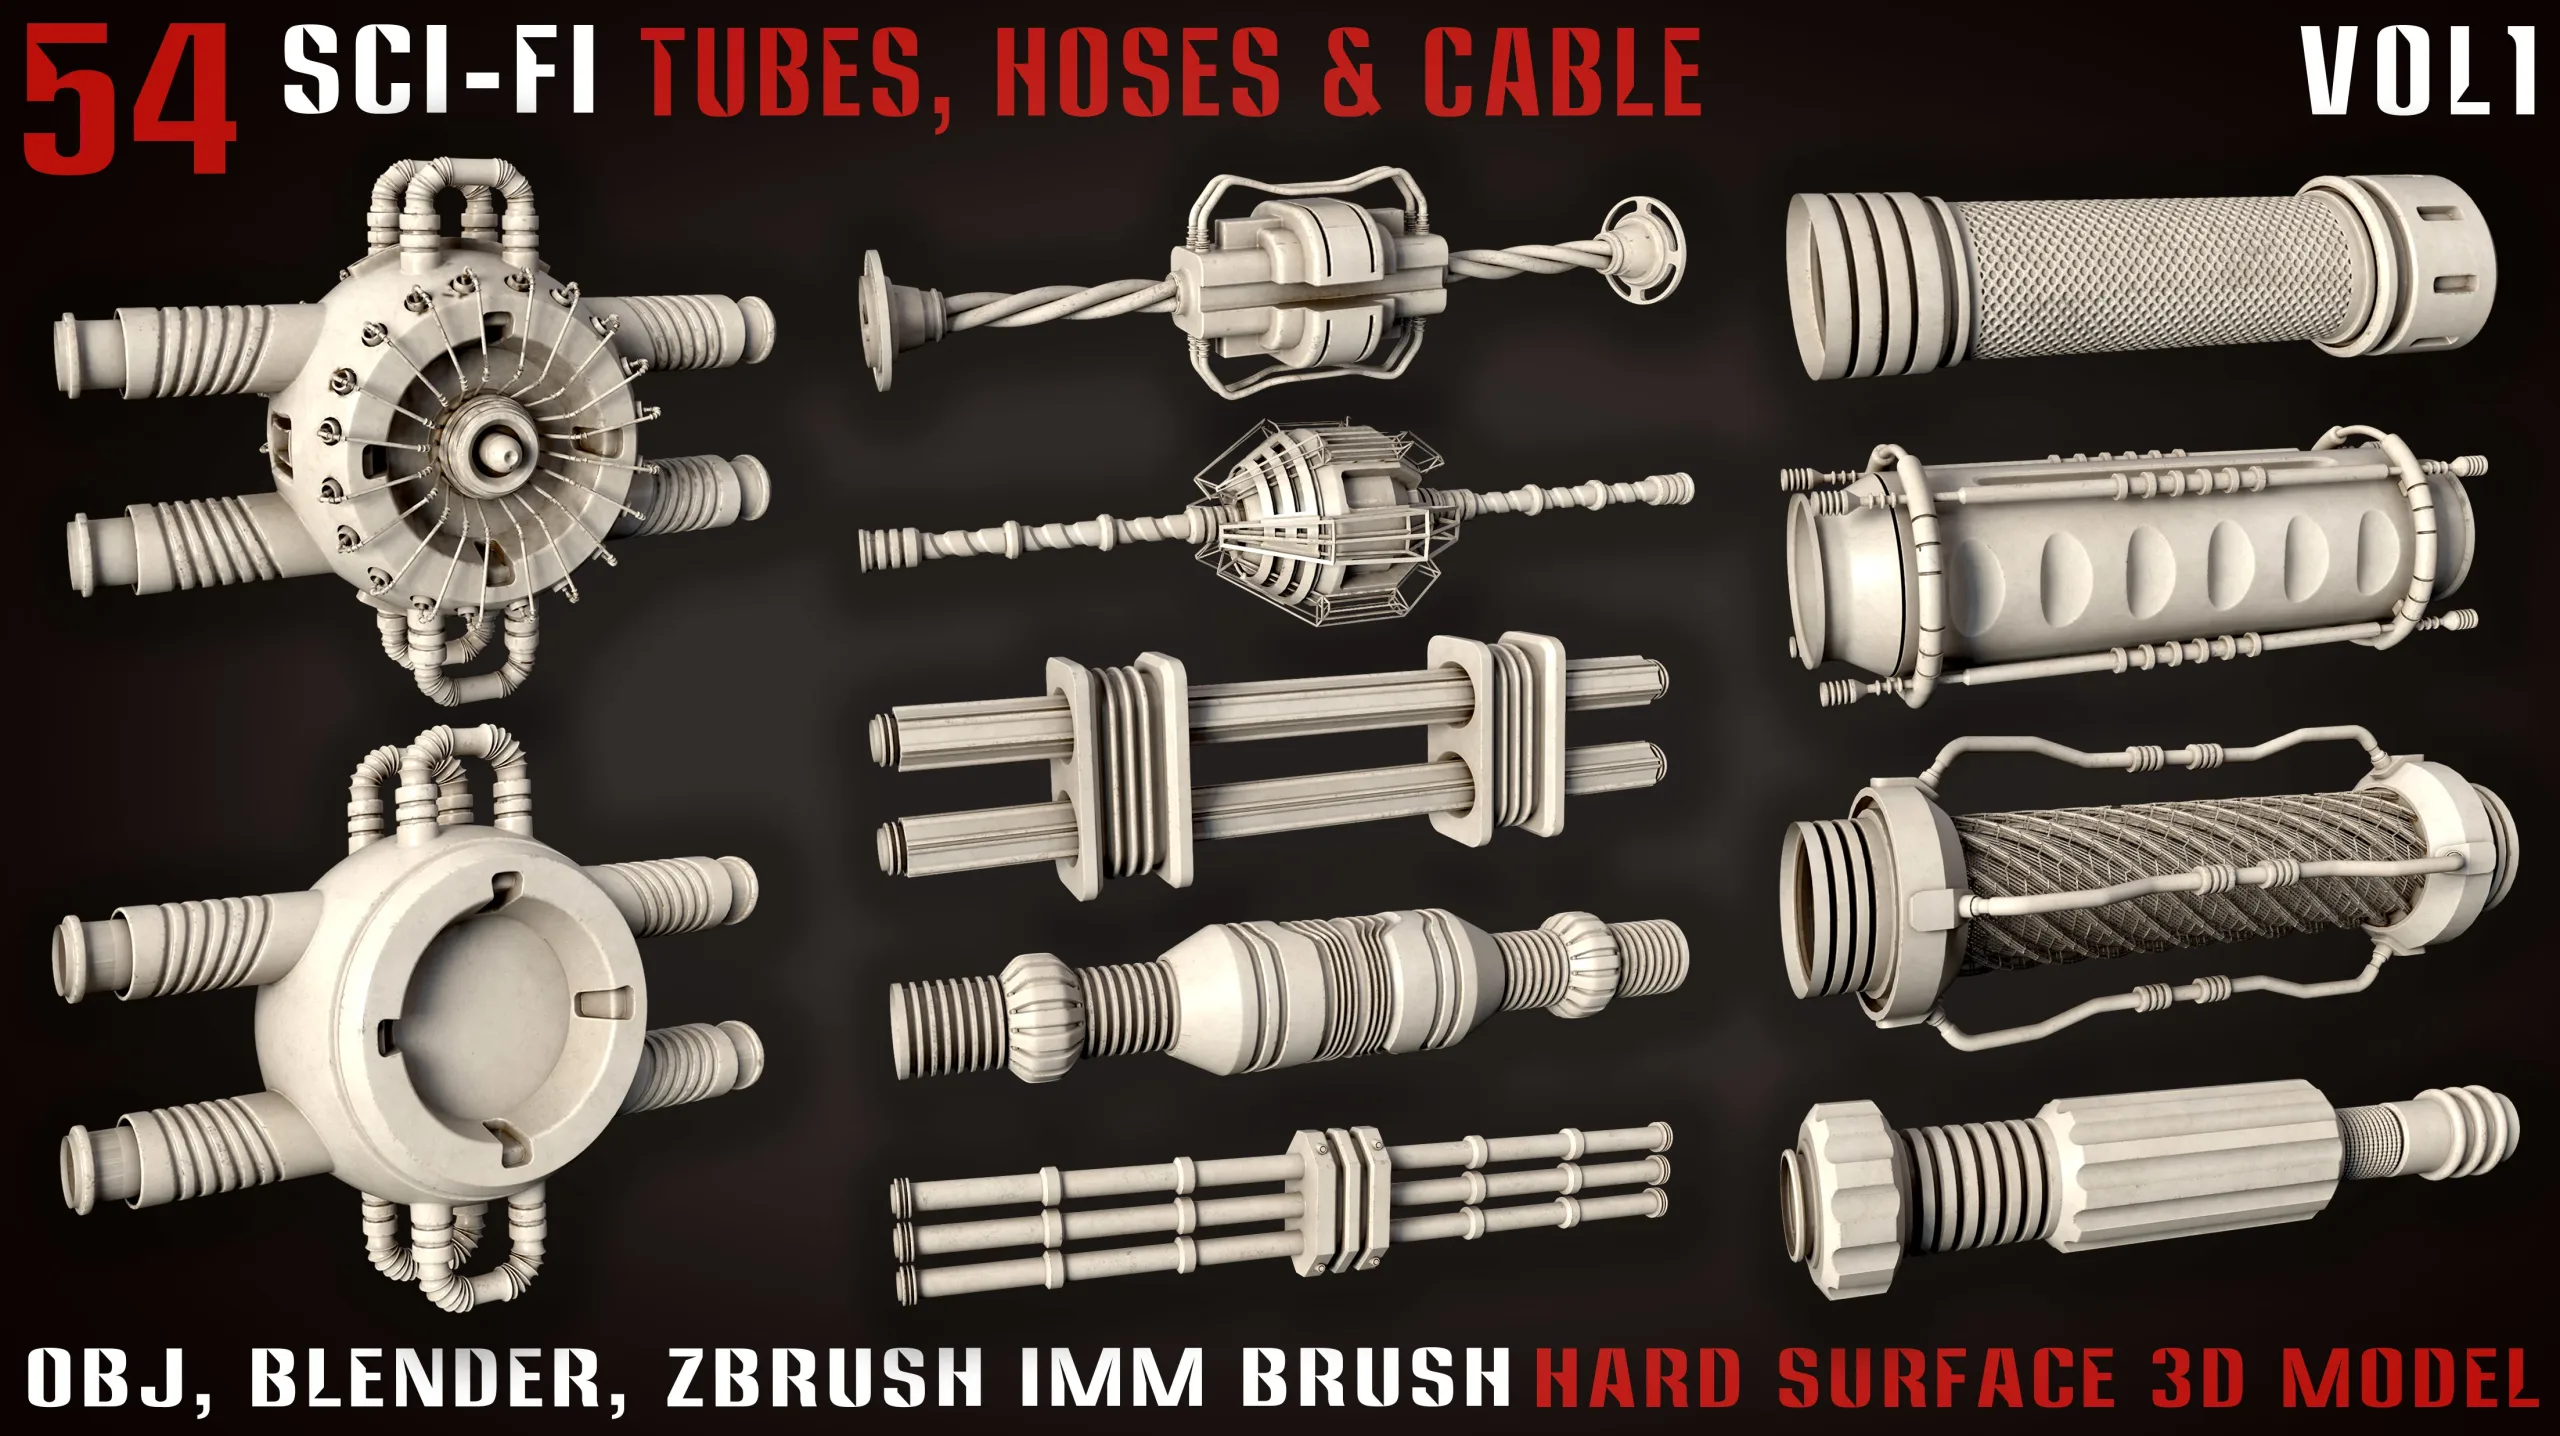 54 Sci-Fi Tubes, Hoses and Cables - vol1